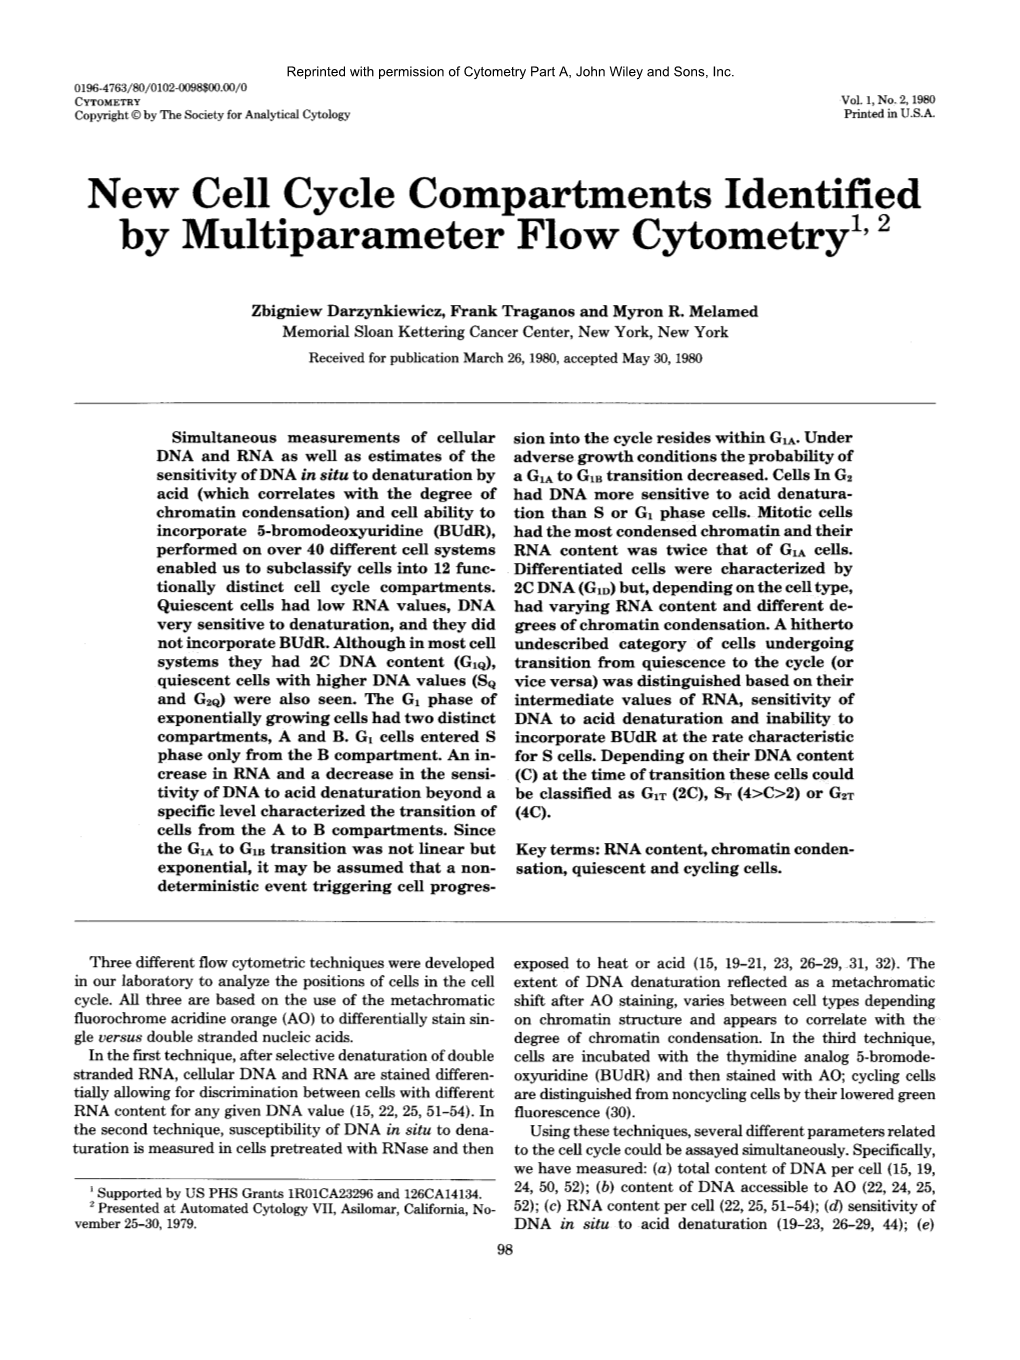 New Cell Cycle Compartments Identified by Multiparameter Flow Cytometry1, 2